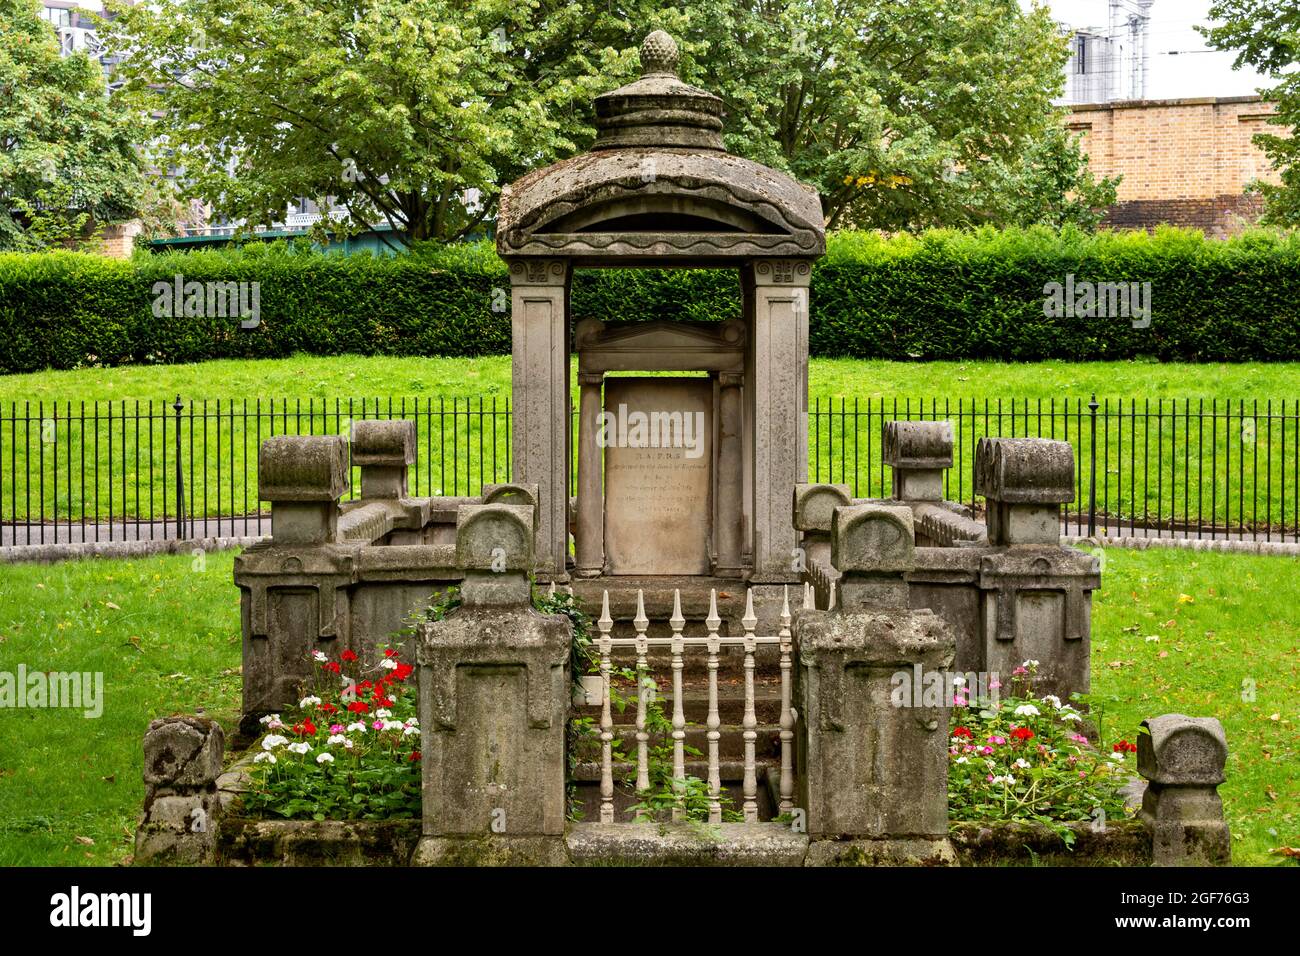 LONDON SOMERS TOWN SAINT PANCRAS OLD CHURCH THE SOANE MAUSOLEUM A LISTED MONUMENT Stock Photo